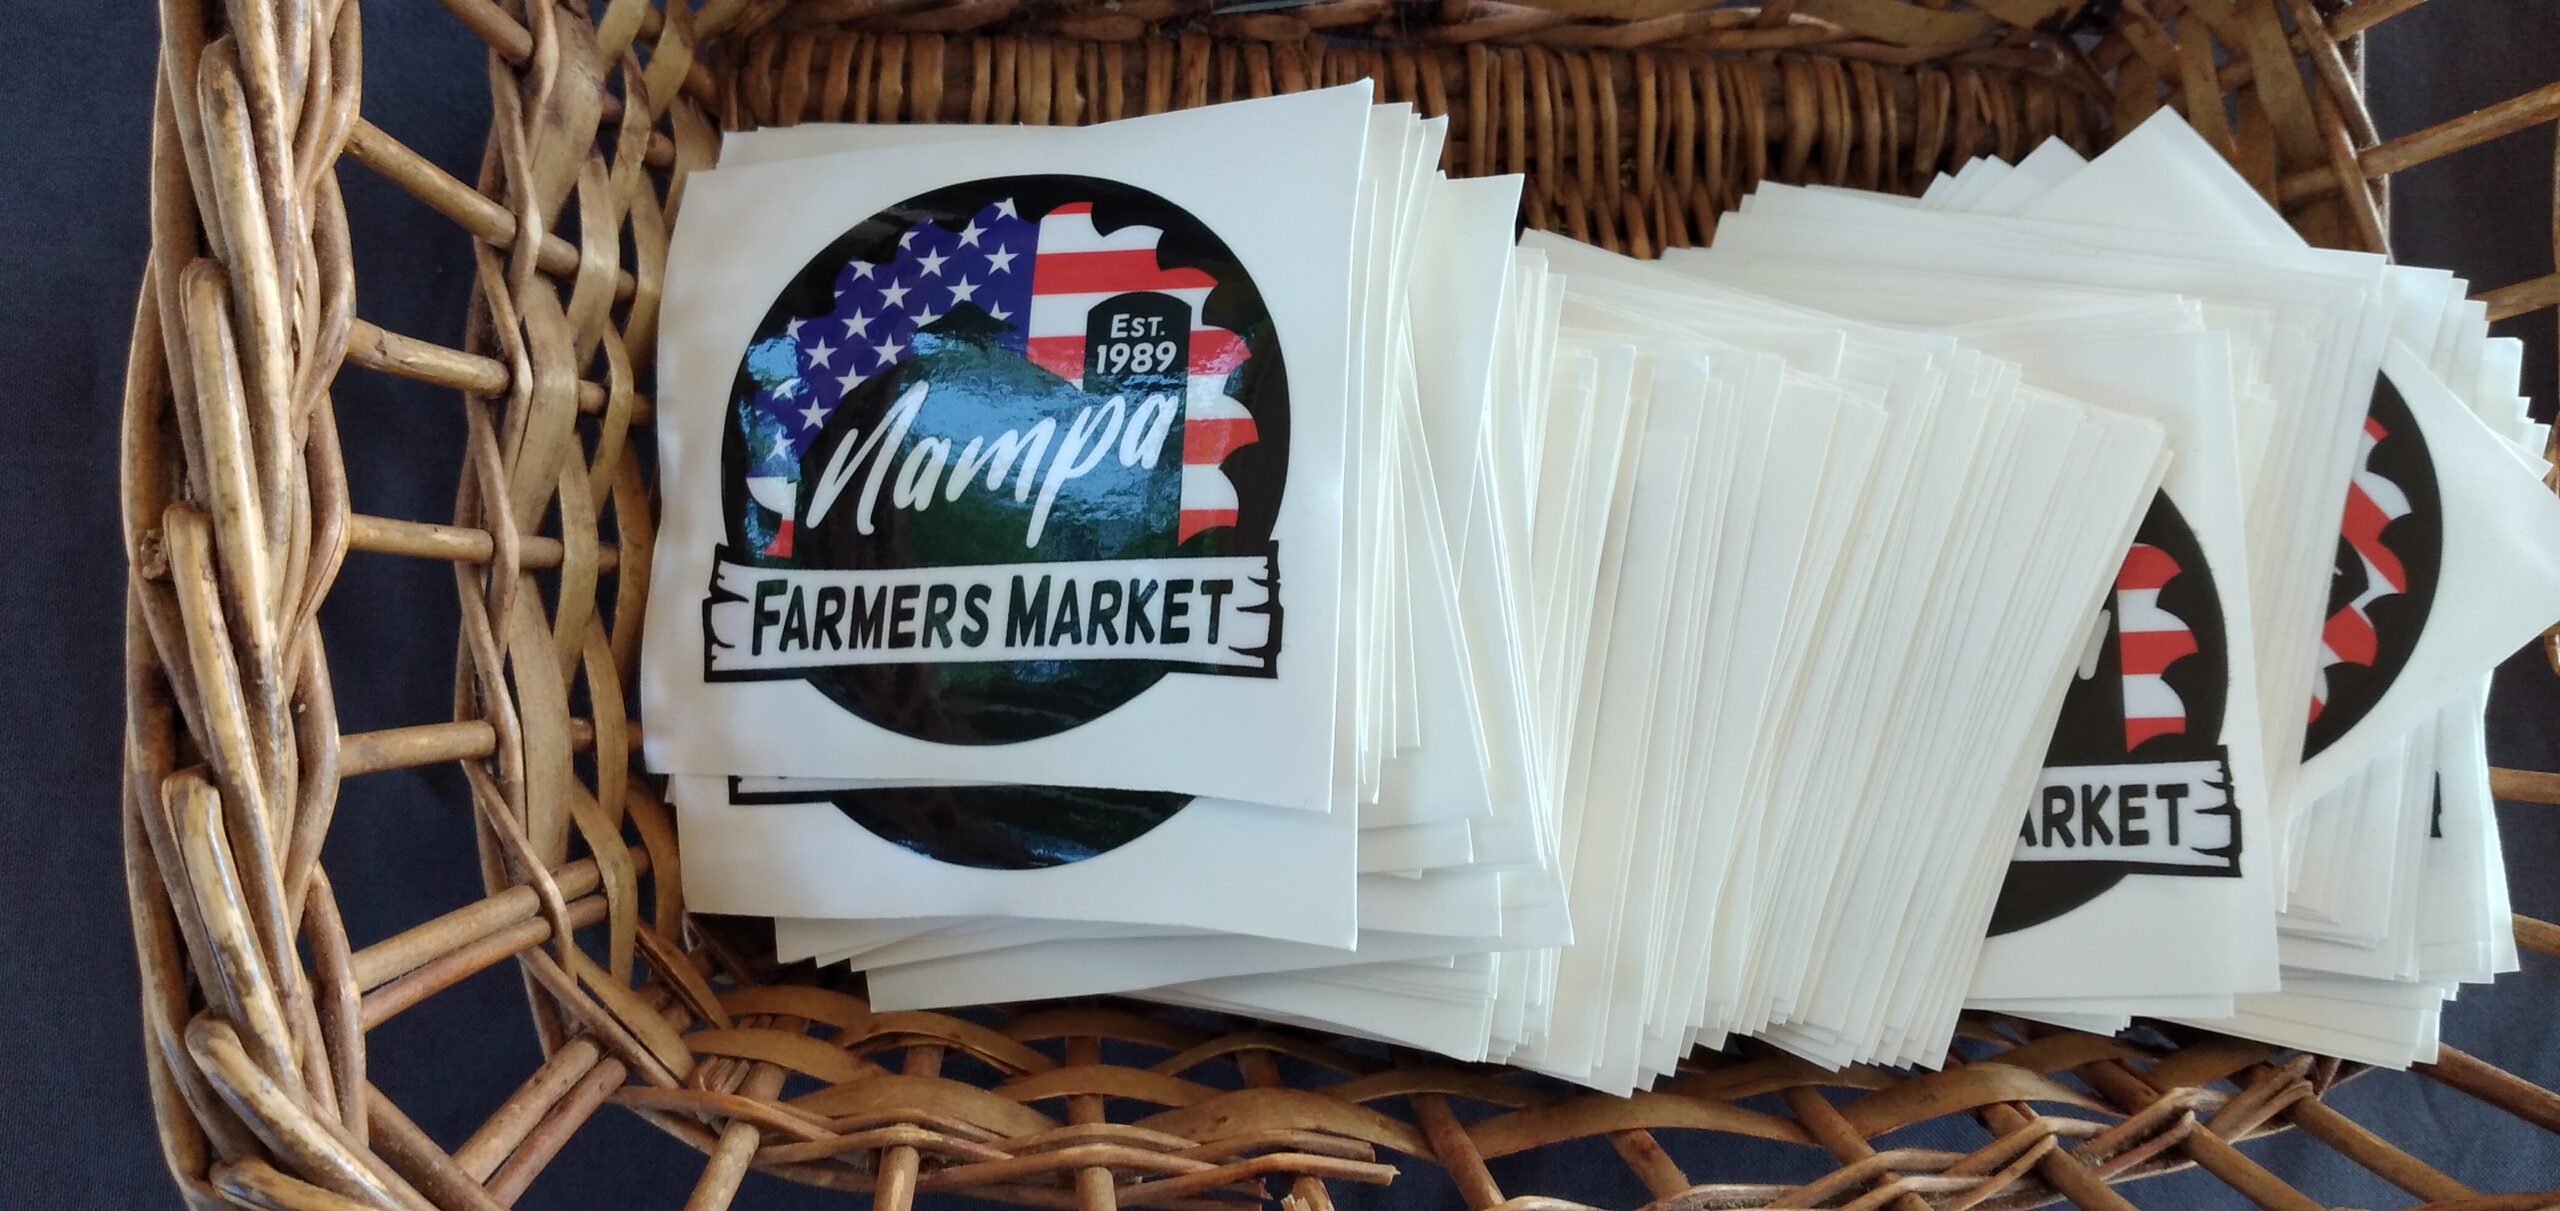 Nampa Farmers Market Voted One of the Top Farmers Markets in the USA